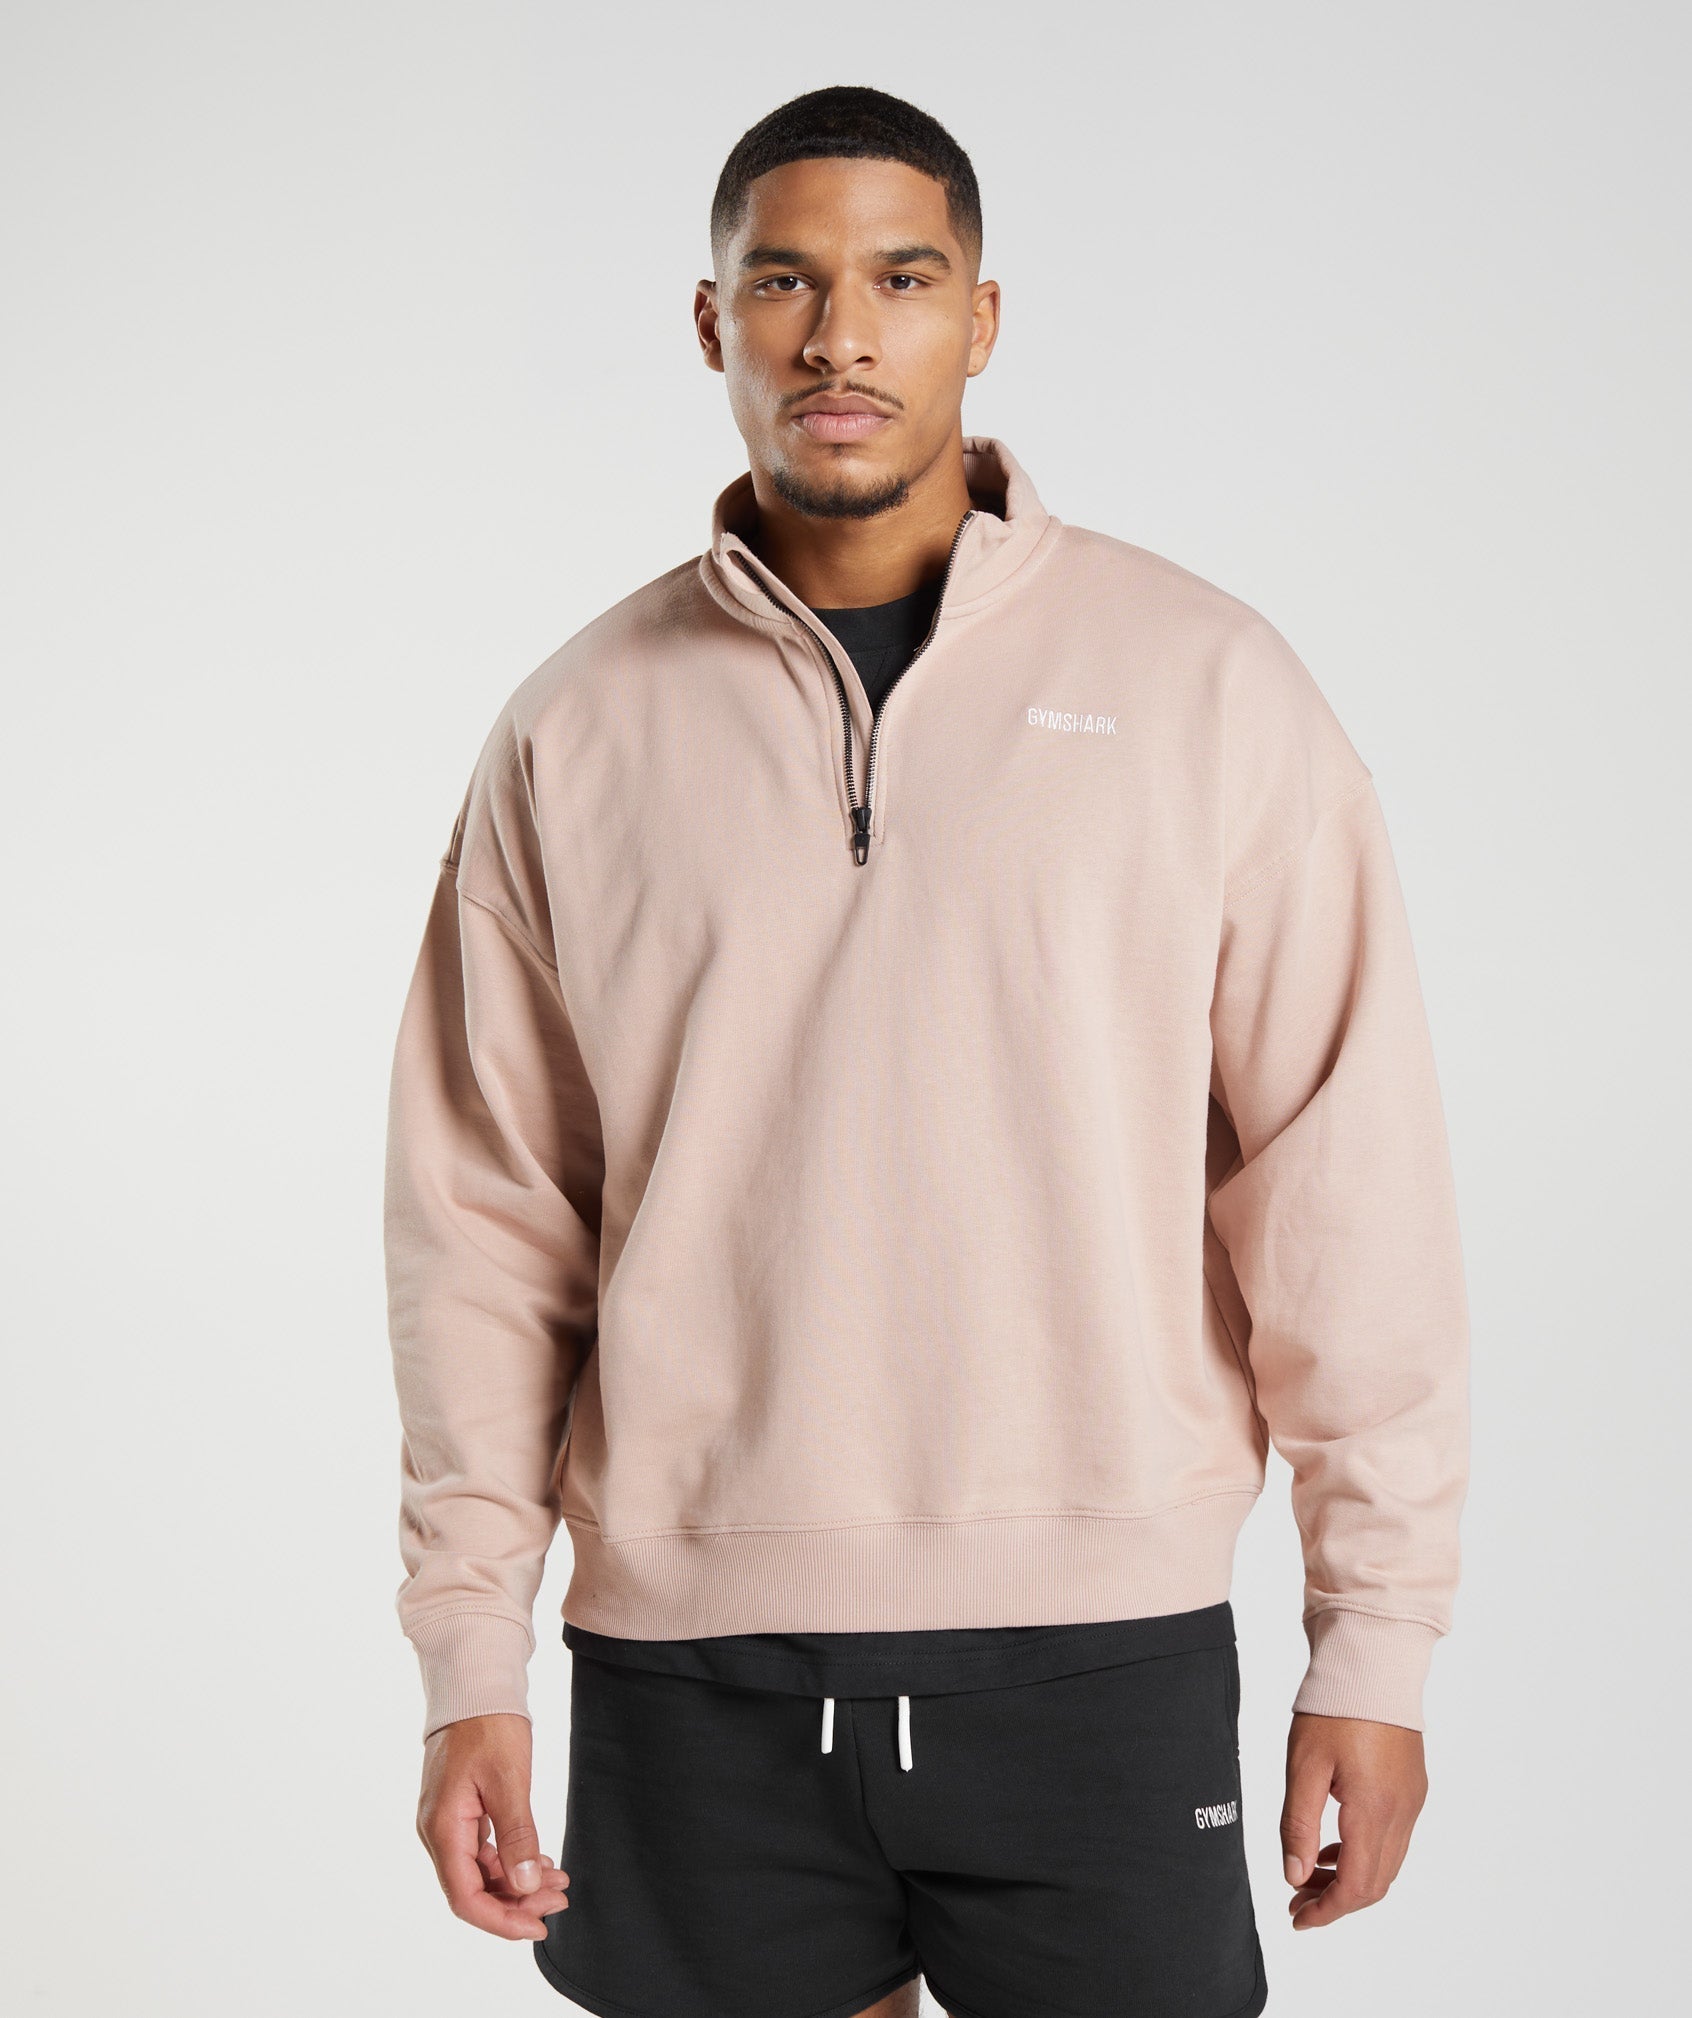 Rest Day Sweats 1/4 Zip in Dusty Taupe